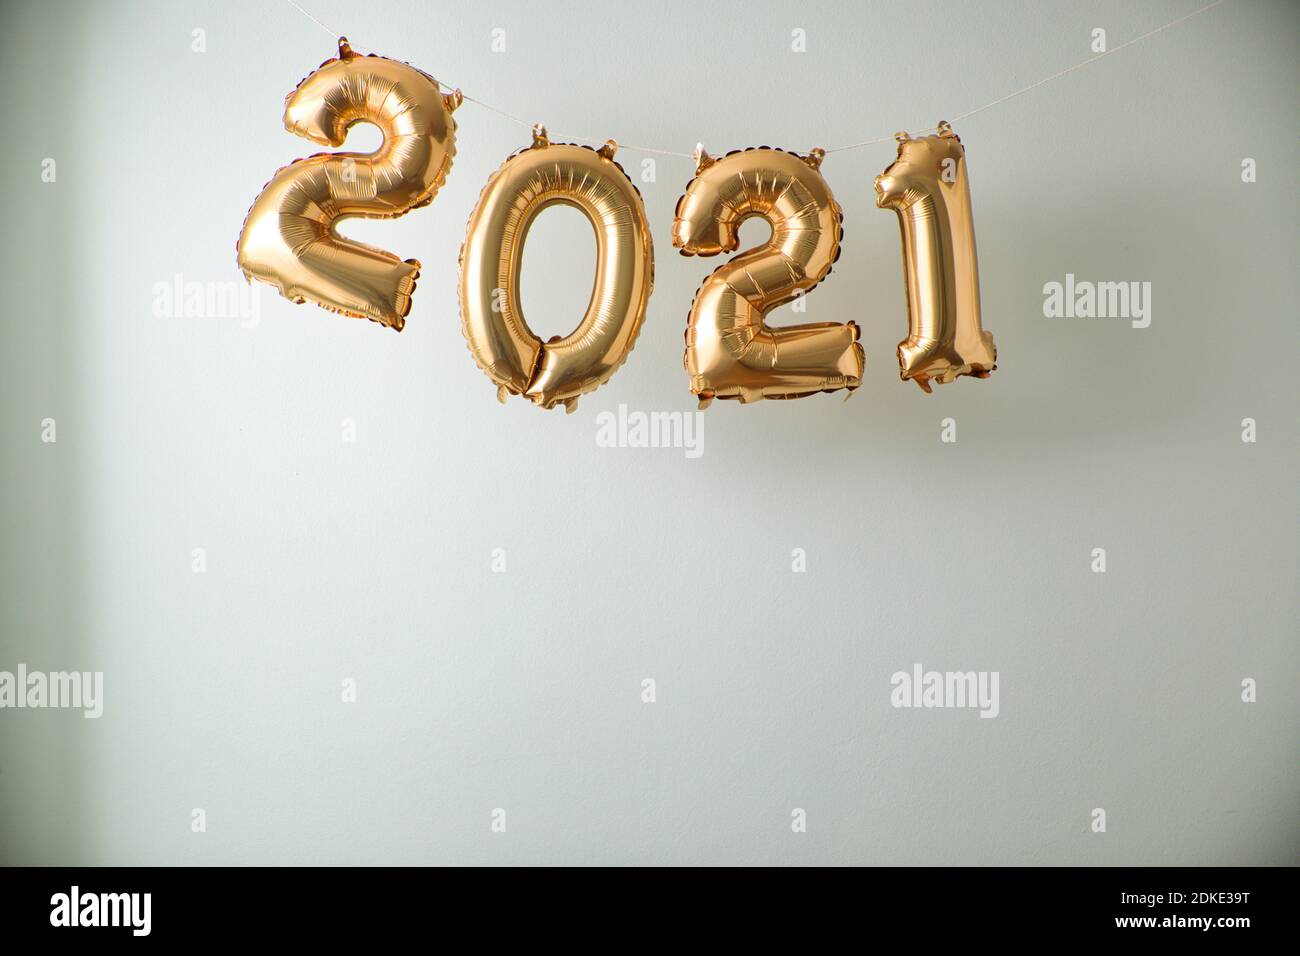 2021 inflated balloon numbers on white indoor background. Stock Photo